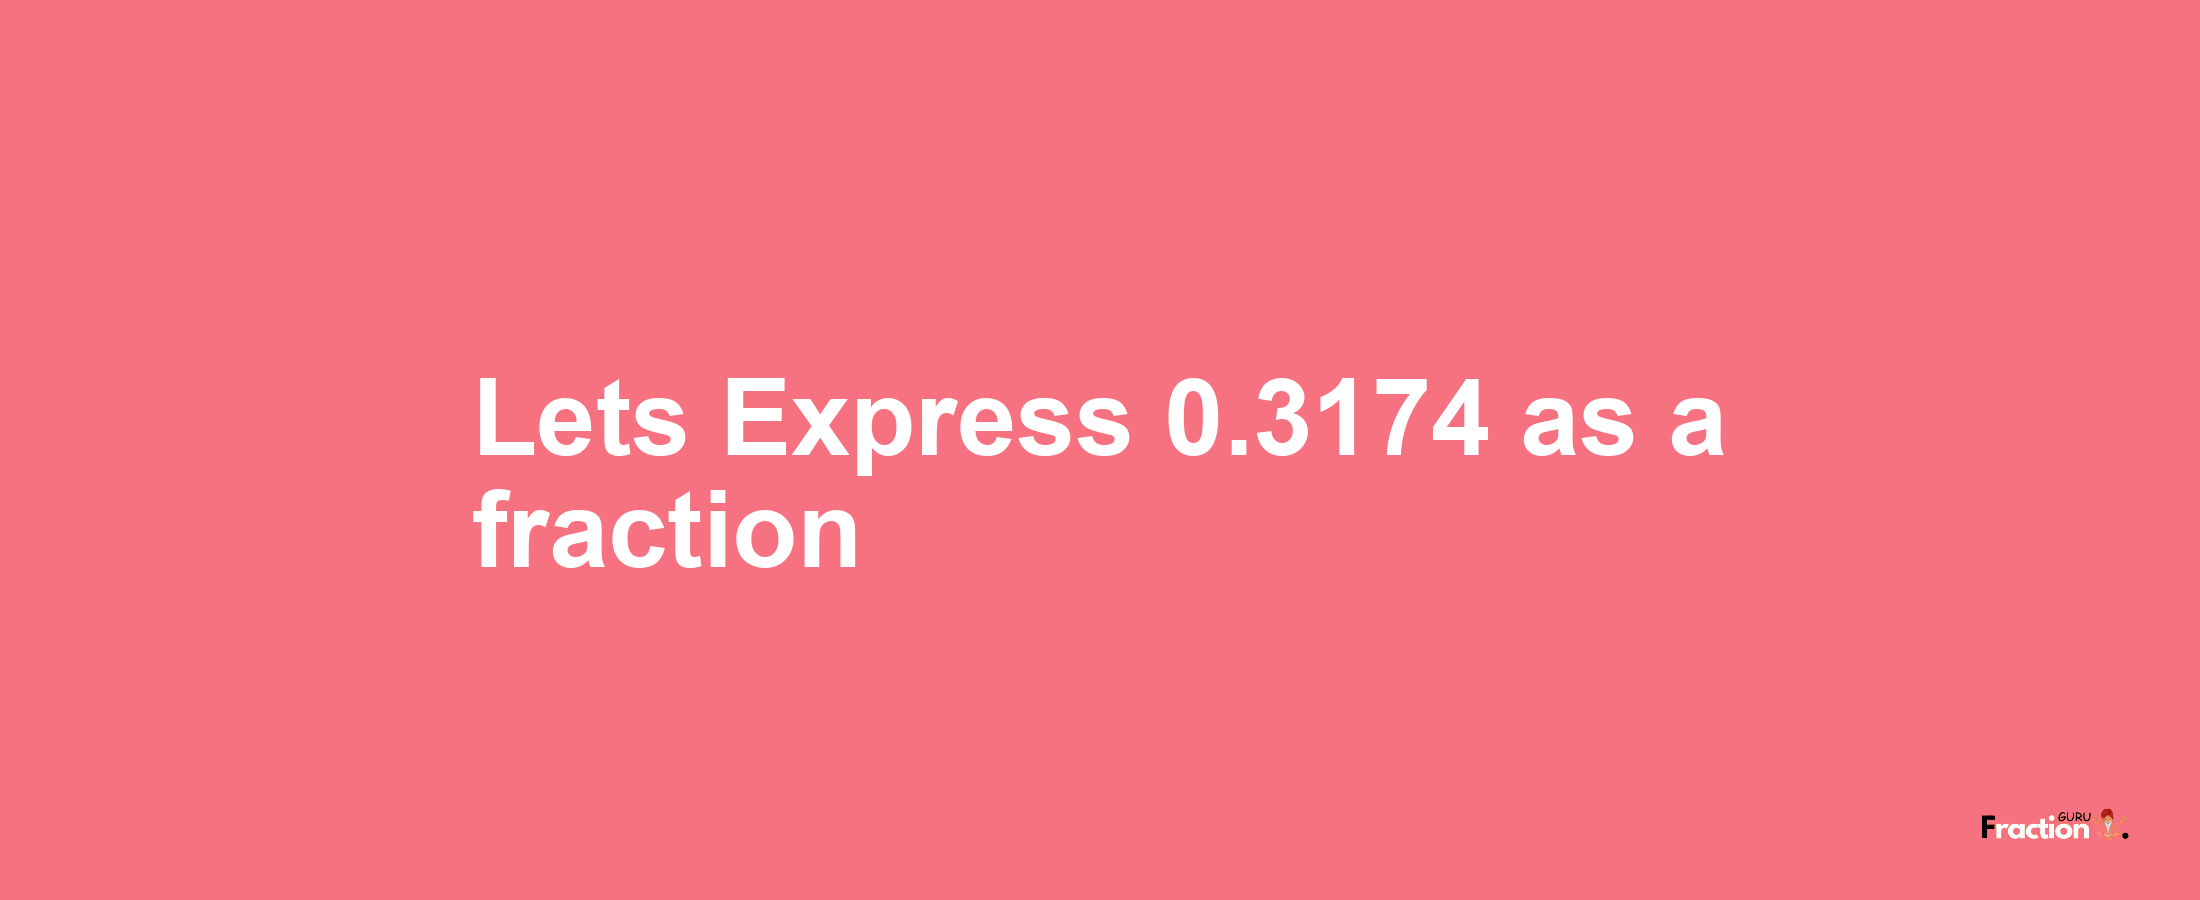 Lets Express 0.3174 as afraction